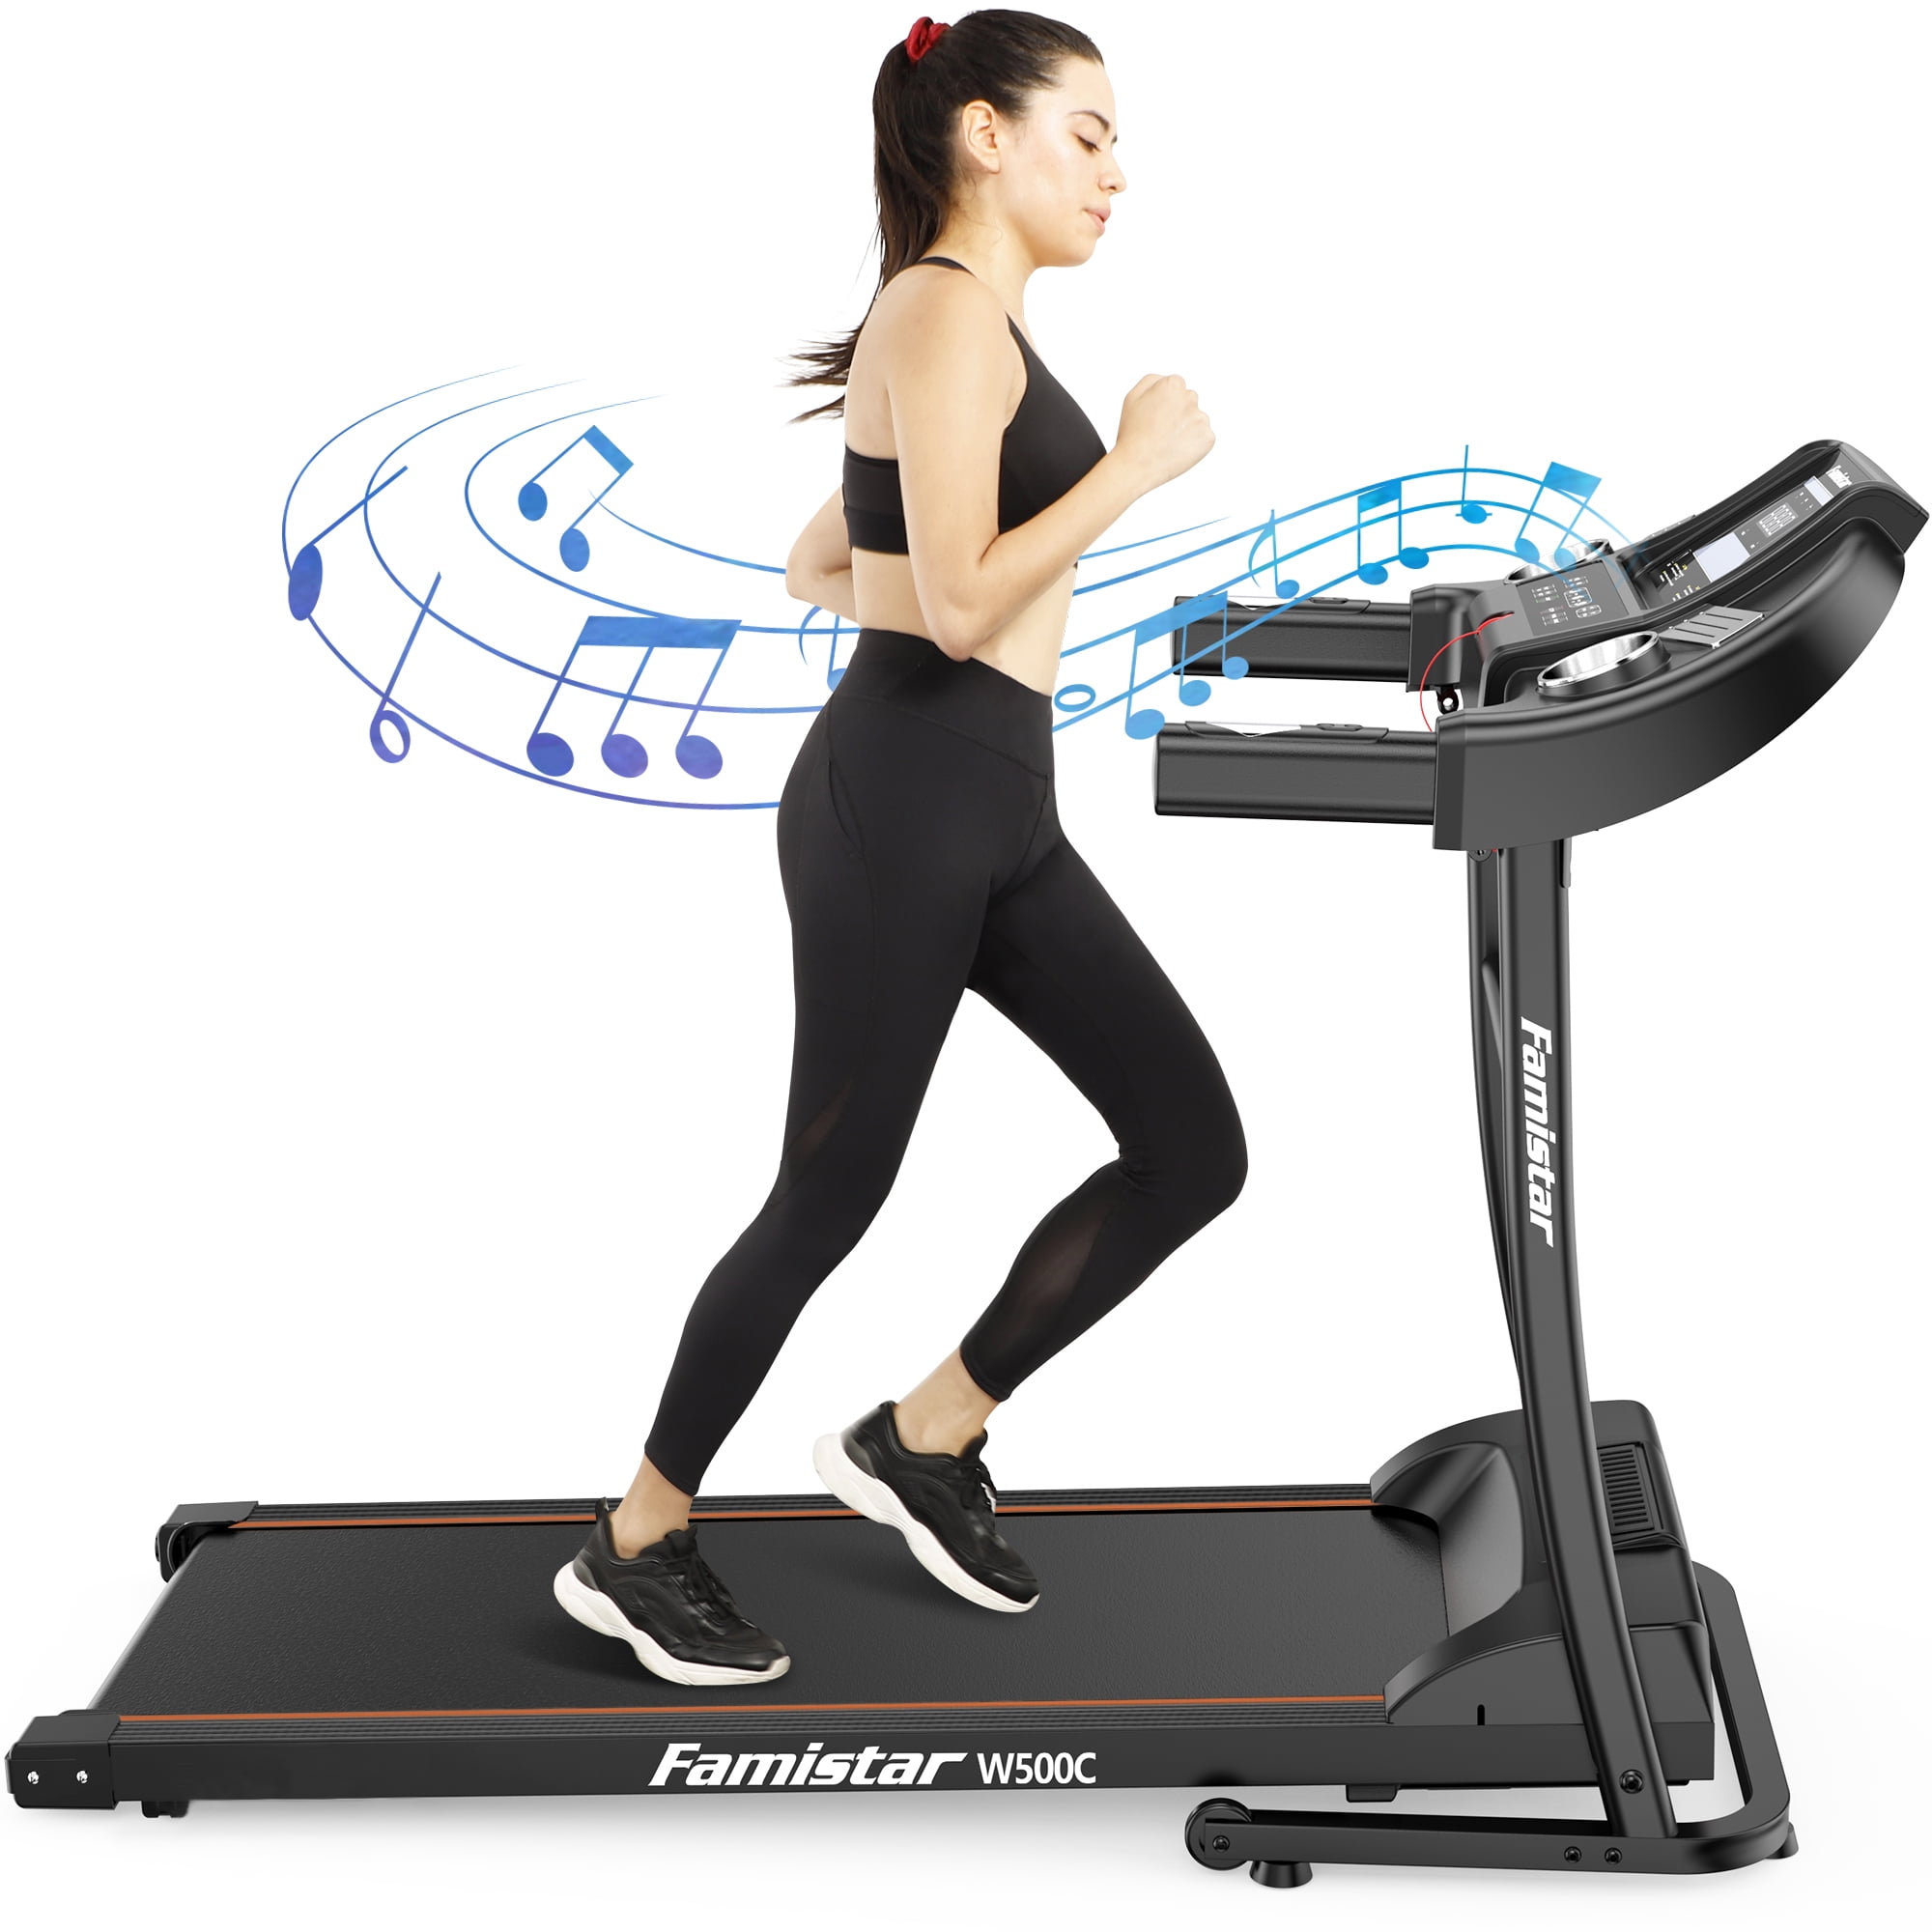 Callm 2.5HP Folding Electric Running Treadmill with LCD Display and Bluetoot 12 Modes Fold-Free InstallationSuitable for All Ages People 